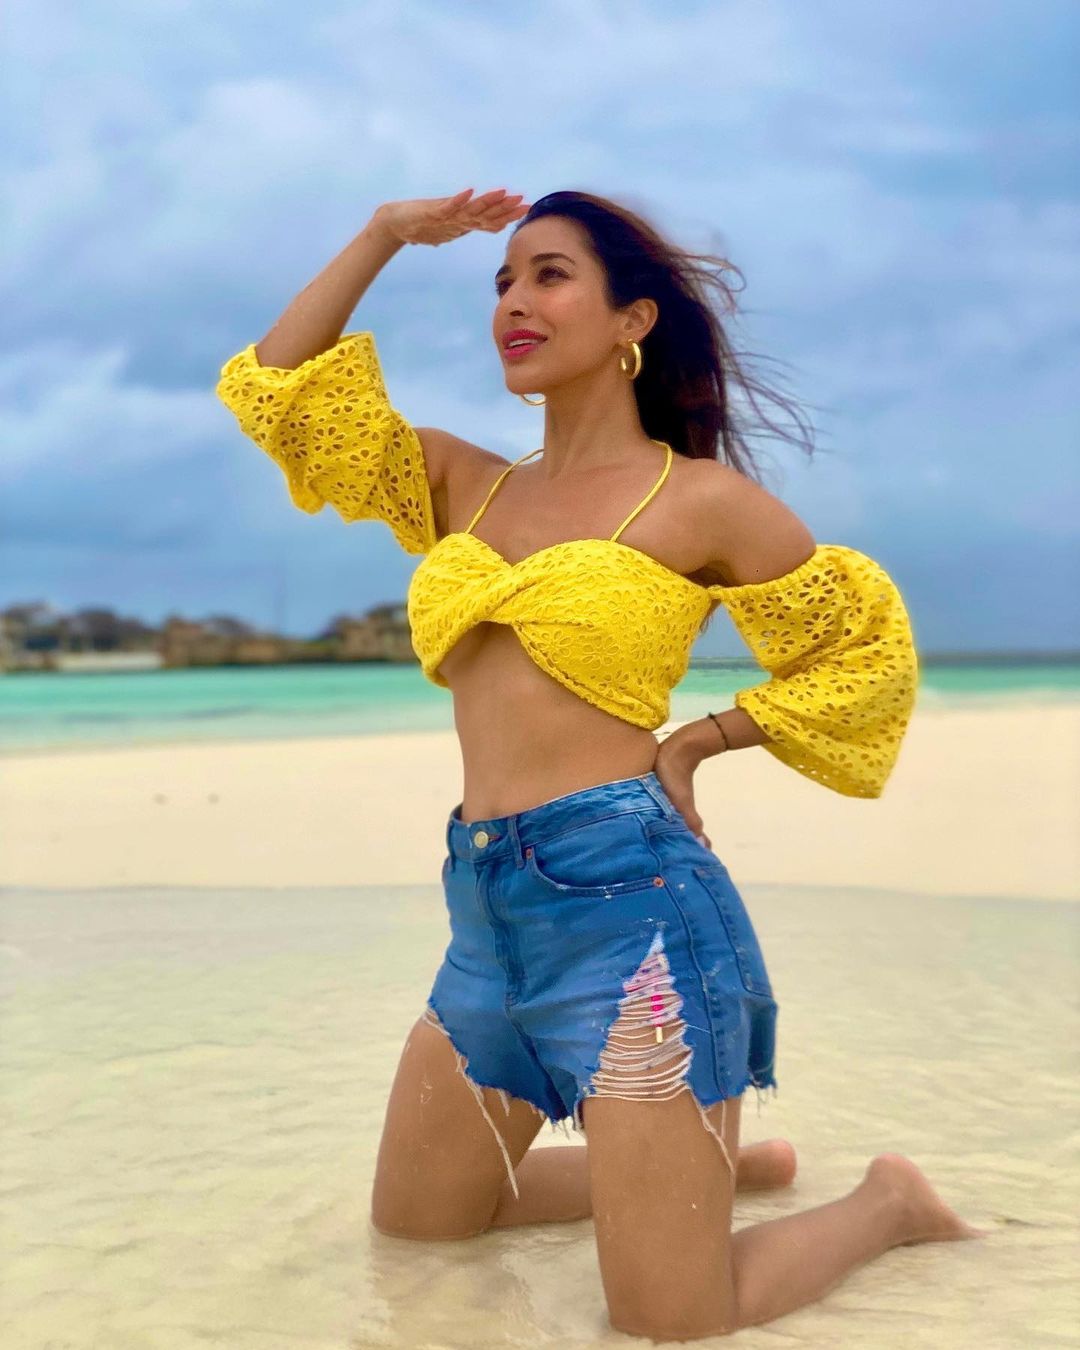 Sophie Choudry looks stunning in the yellow crop top and denim shorts